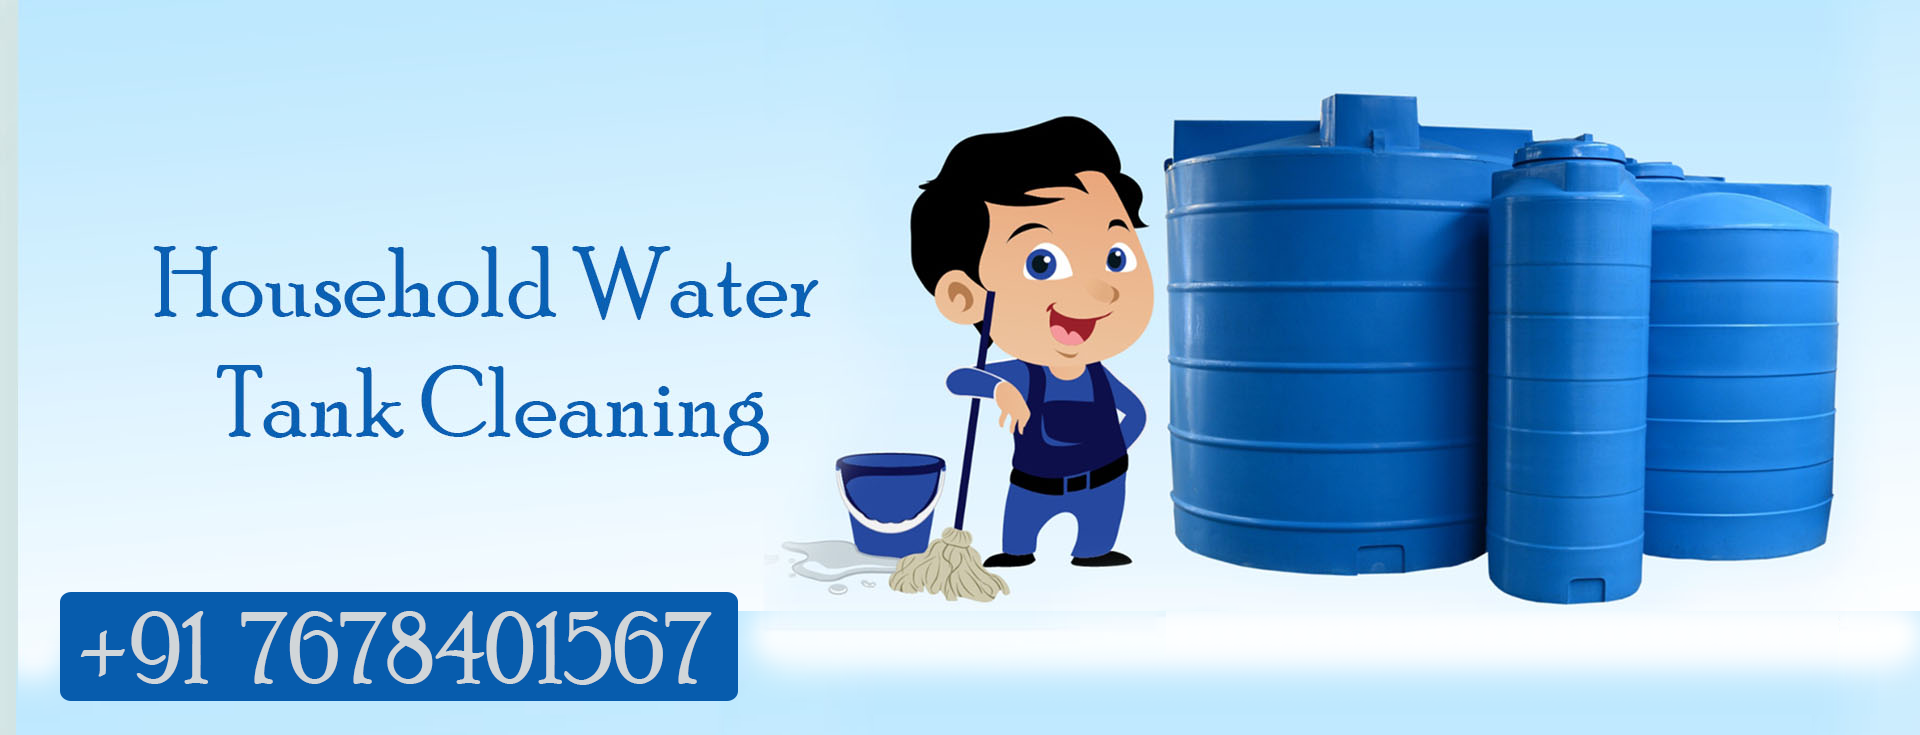 Water tank cleaning services